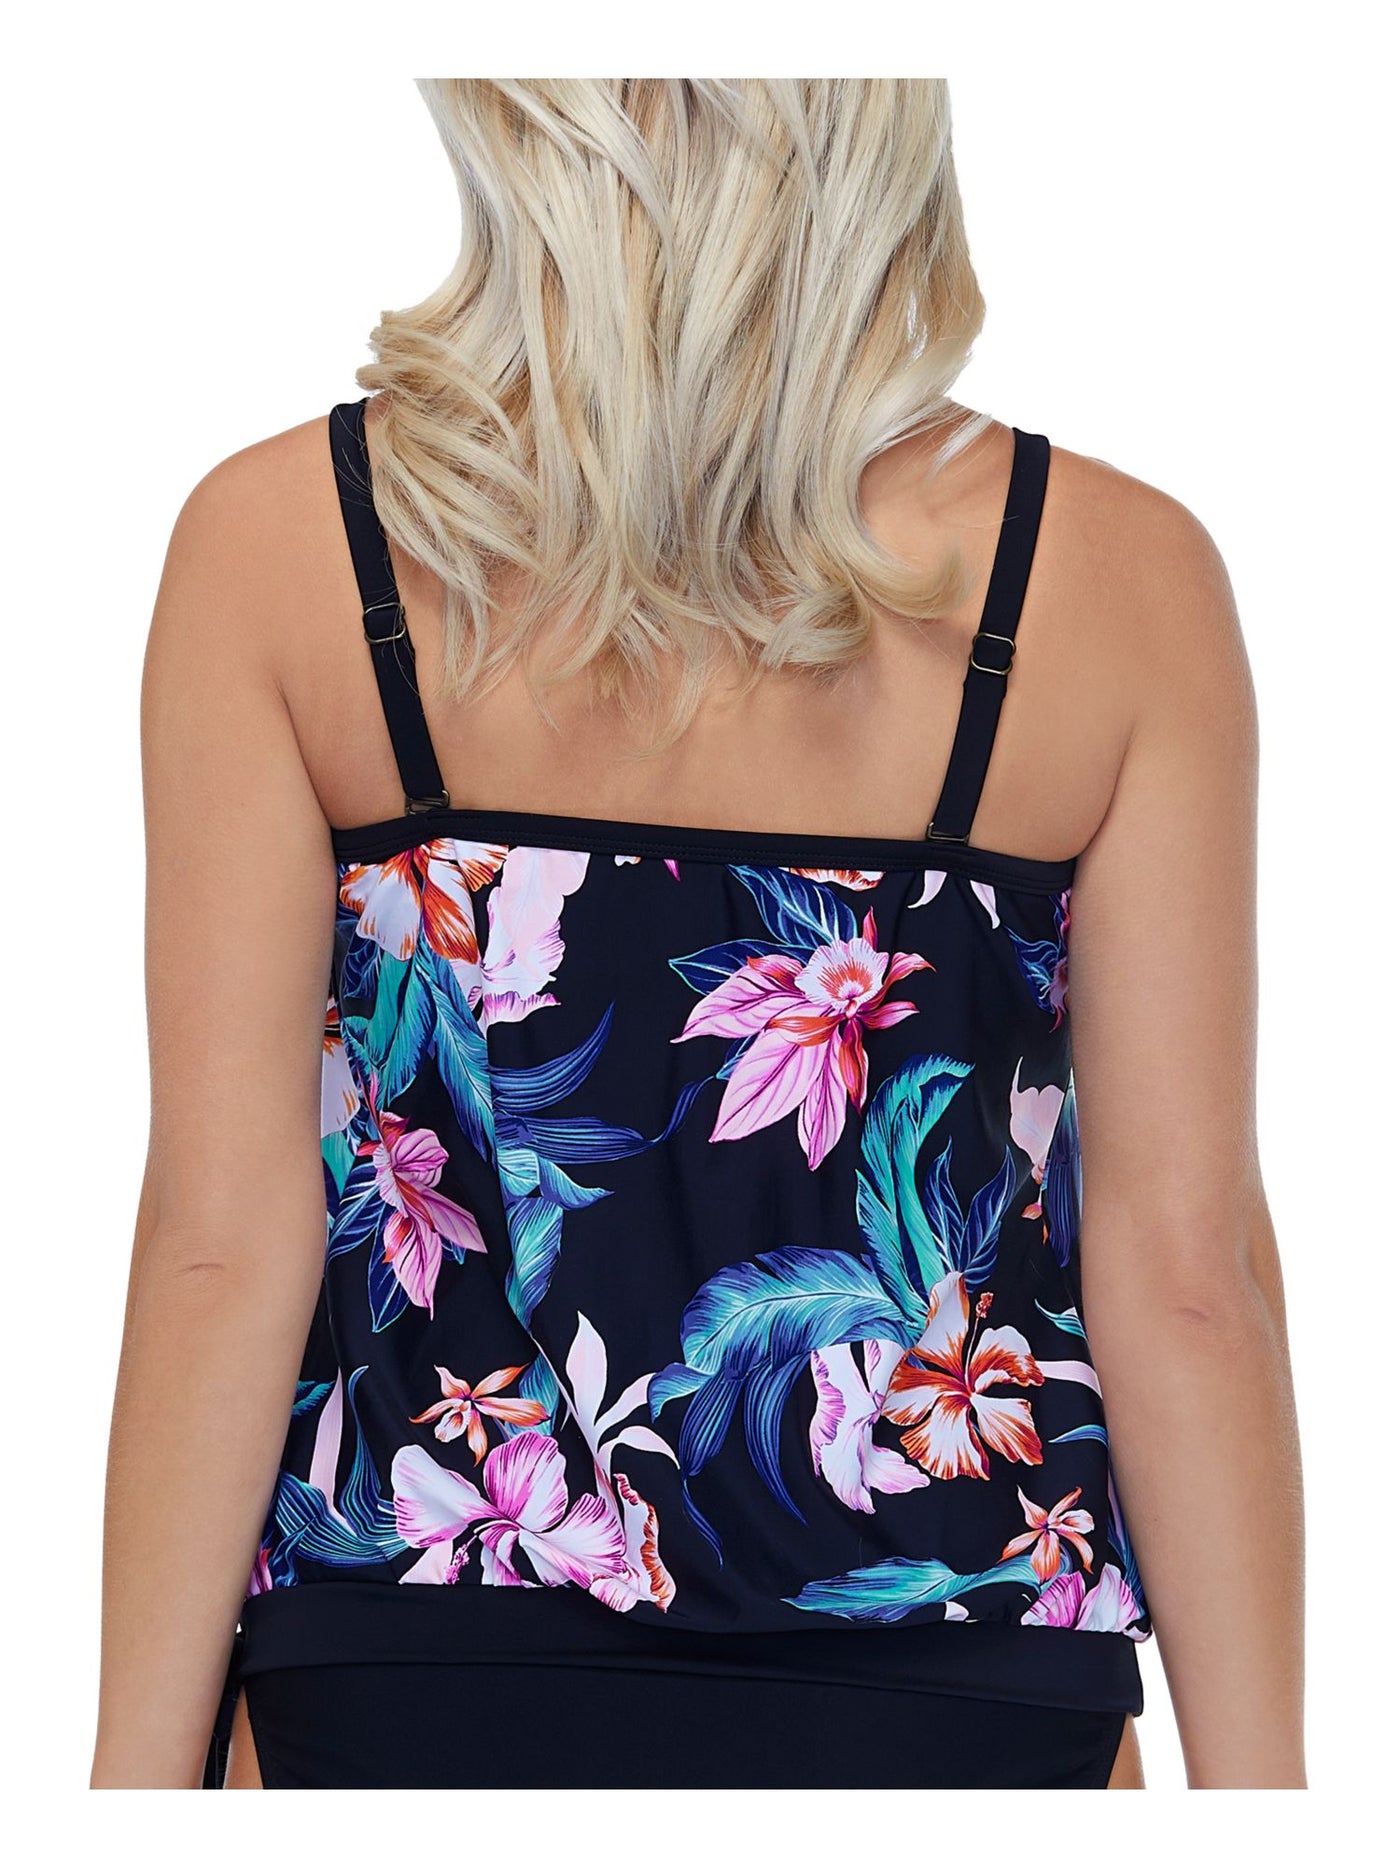 ISLAND ESCAPE Women's Black Floral Removable Straps Removable Cups Pleated Tie Rio Bloom Bandeau Tankini Swimsuit Top 6